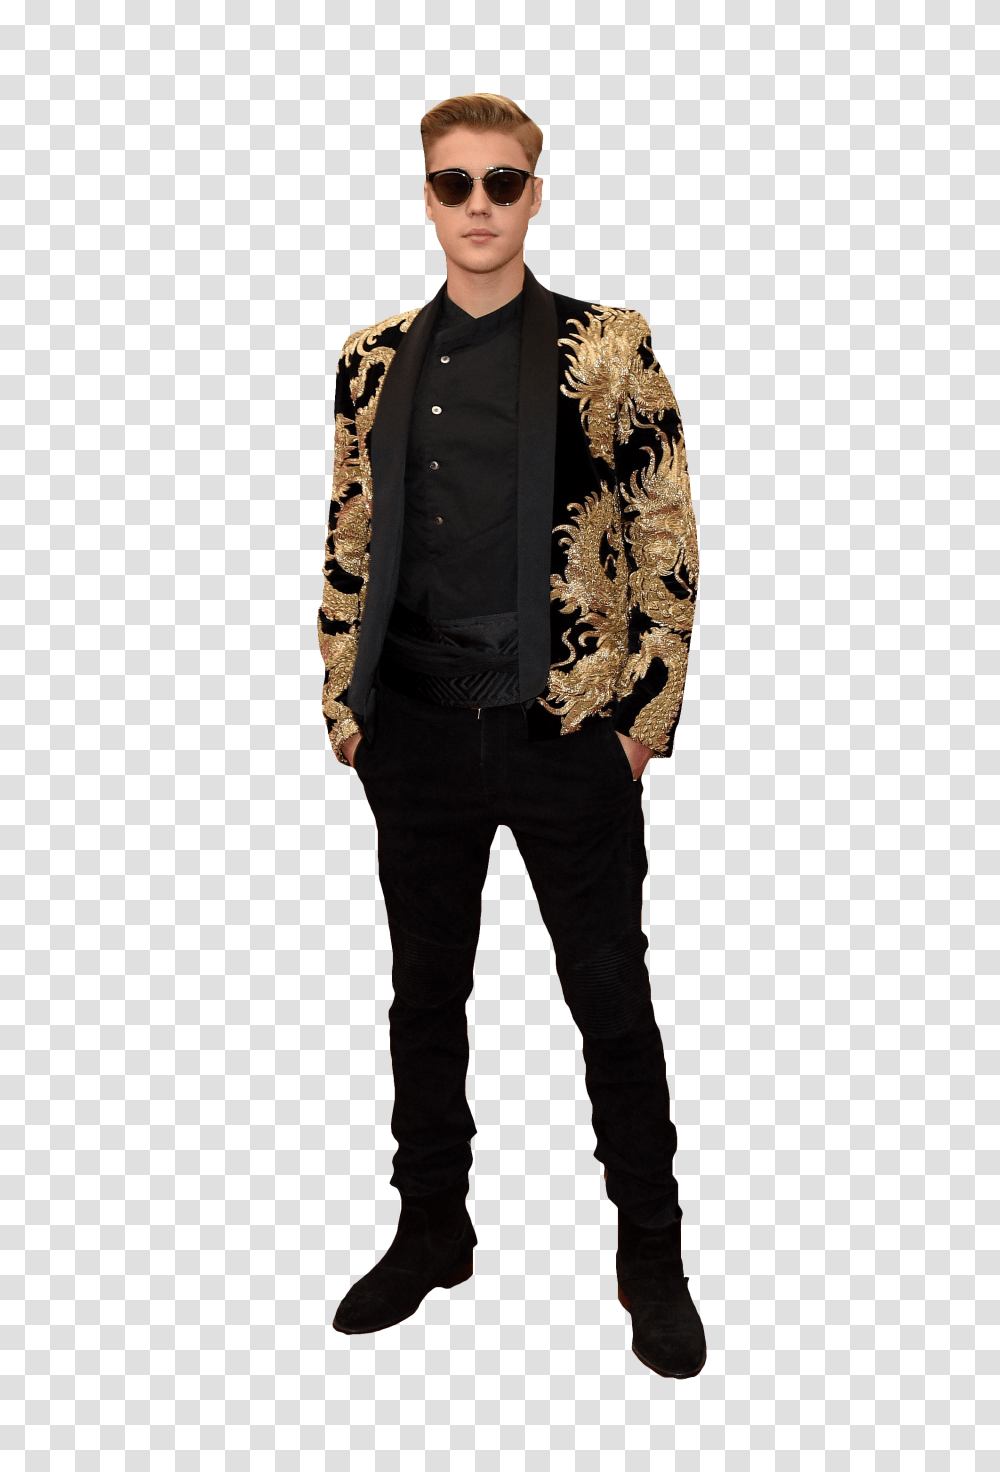 Justin Bieber In Sunglasses Image, Sleeve, Person, Long Sleeve Transparent Png